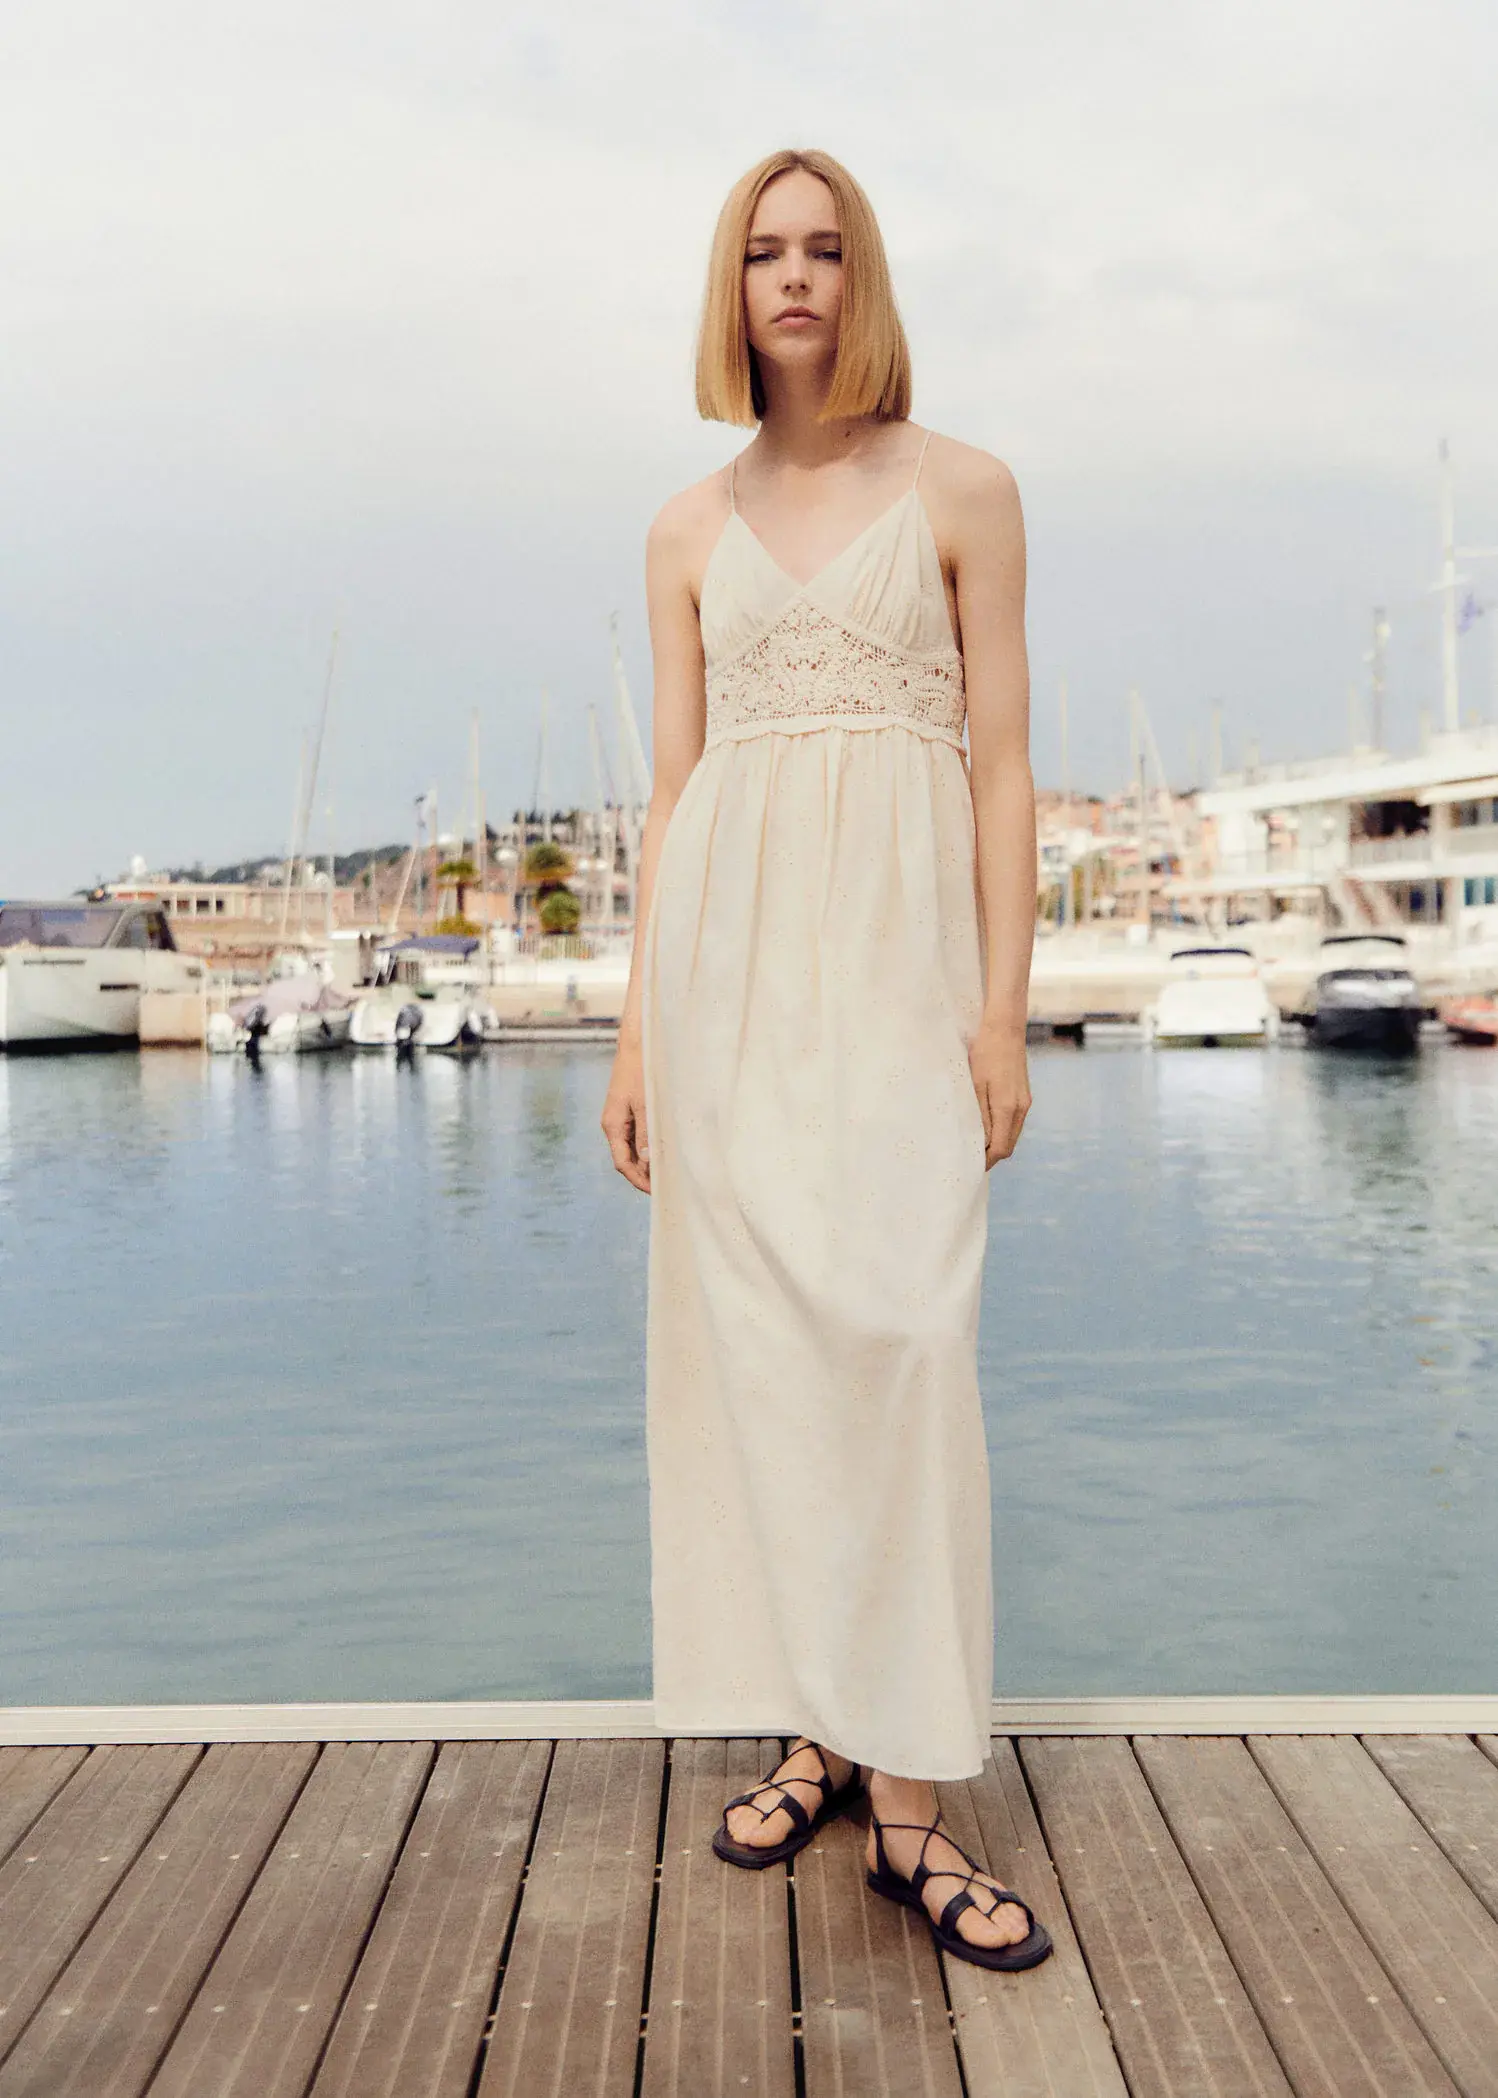 Mango Crochet panel dress. a woman standing on a dock in front of boats. 